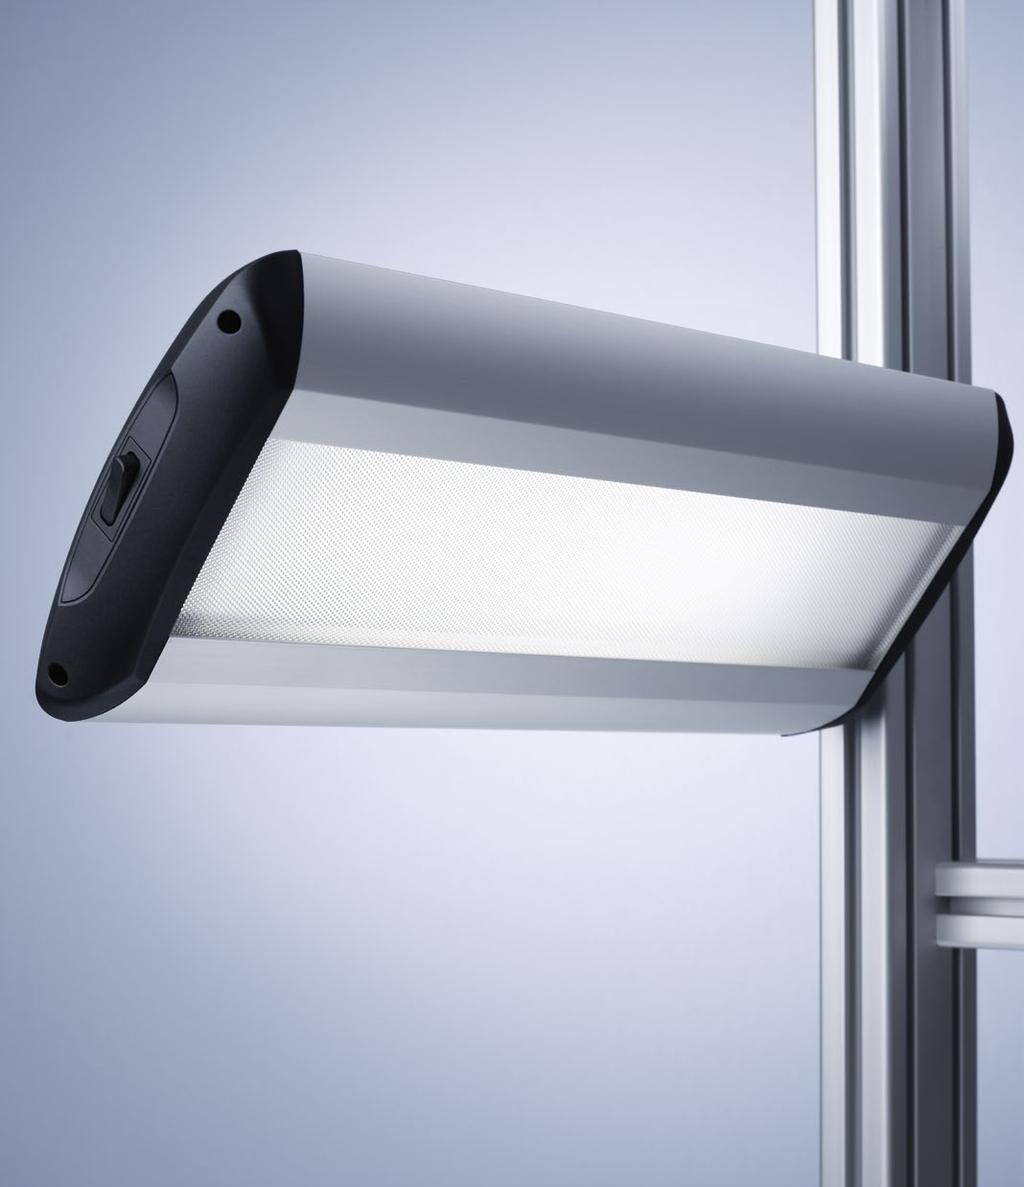 62 TAMETO AN EXTRA HELPING OF LIGHT TAMETO this laterally mounted luminaire produces completely shadow-free lighting or an intended shadow effect, as desired.